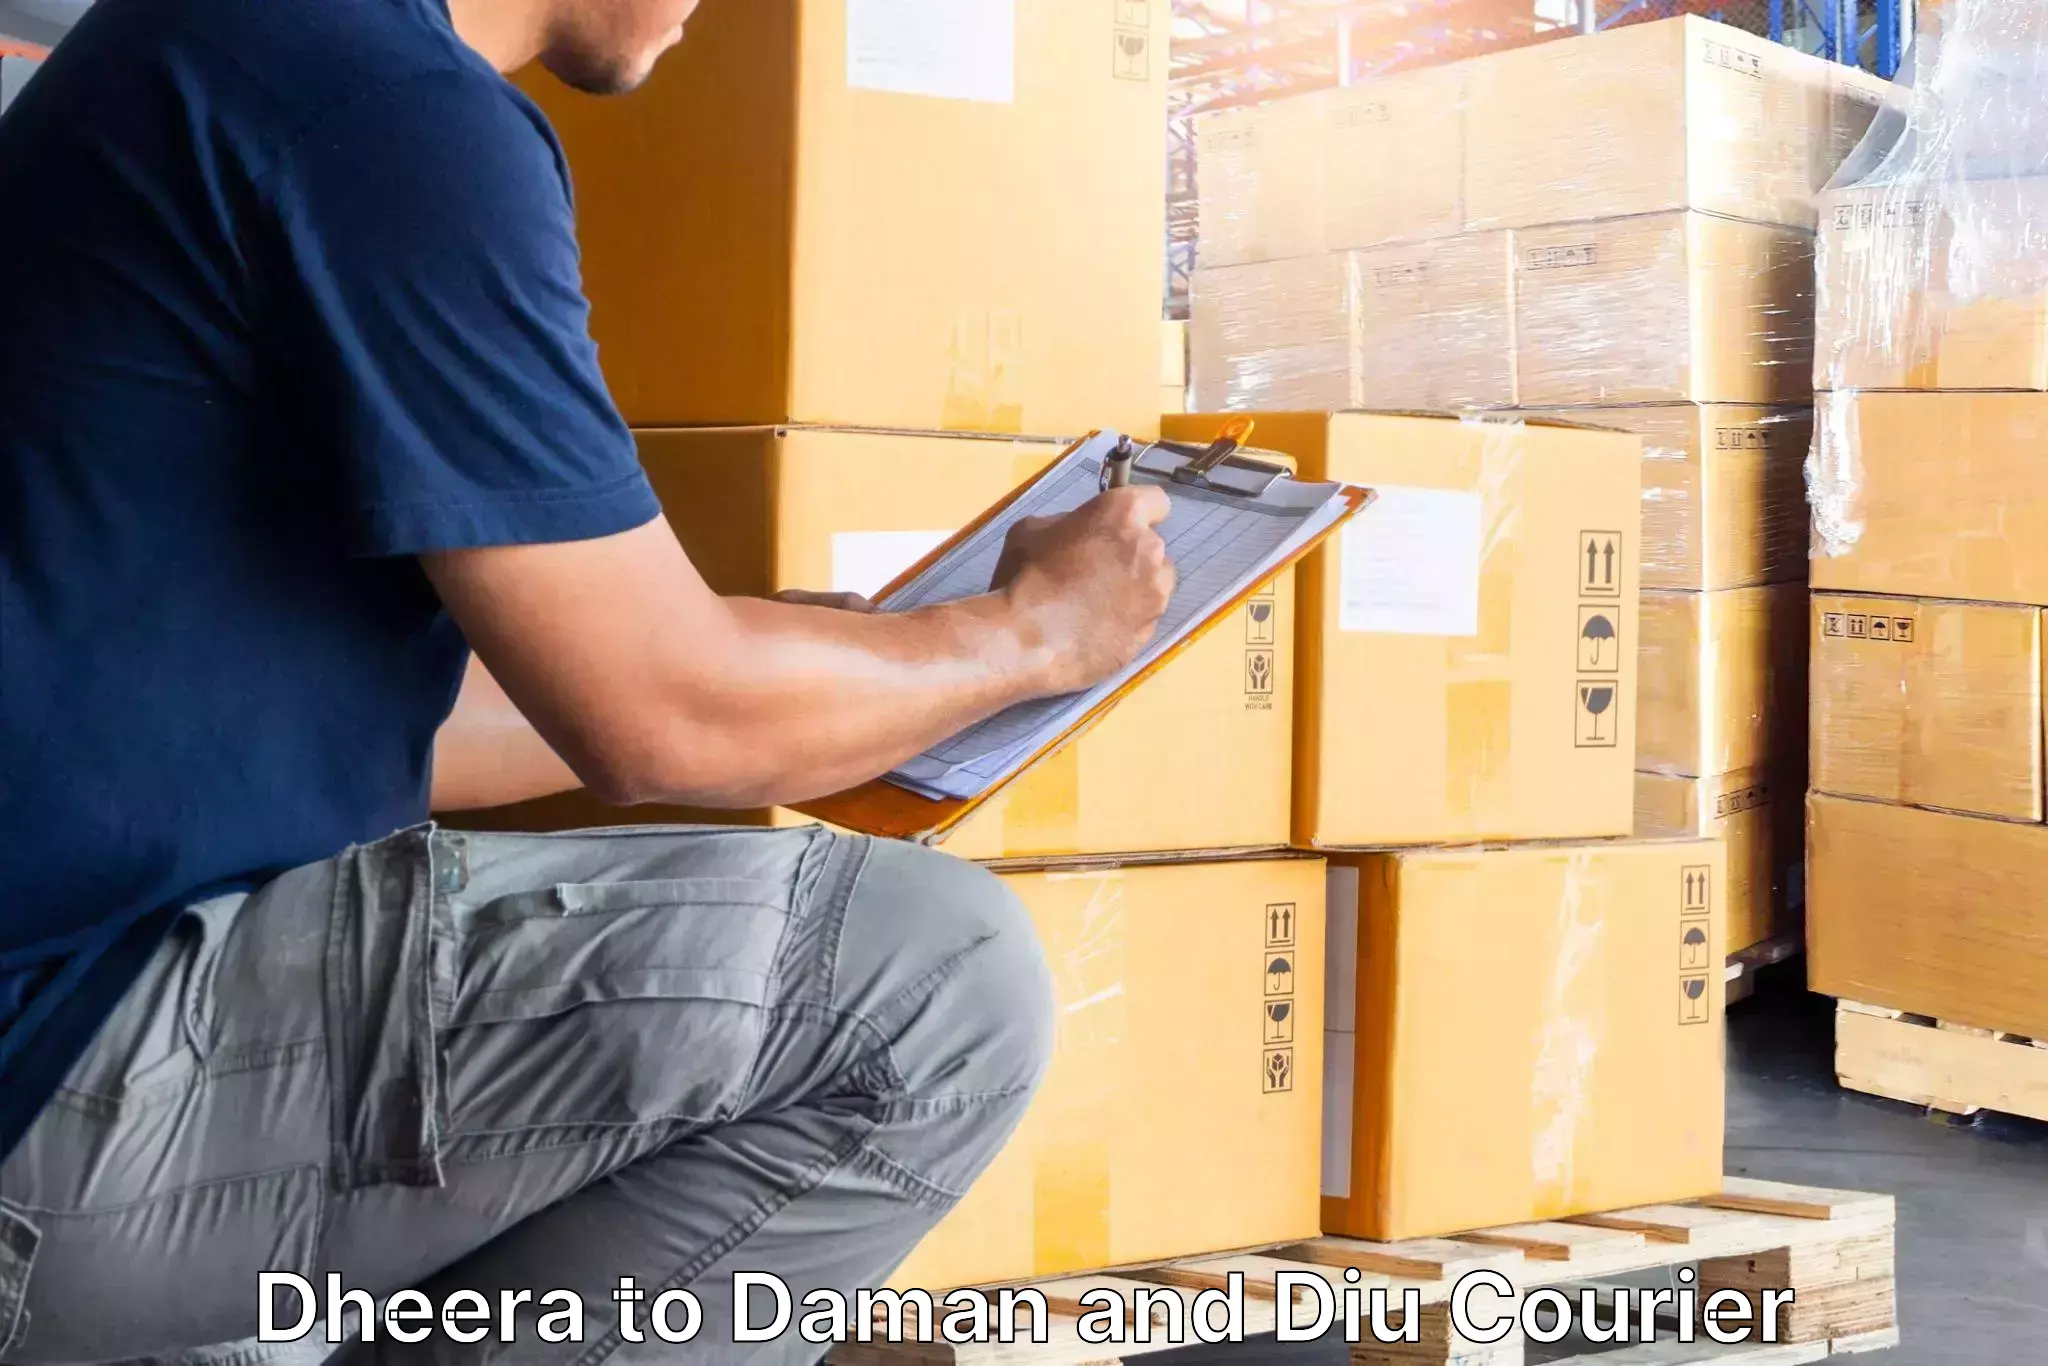 Furniture movers and packers Dheera to Daman